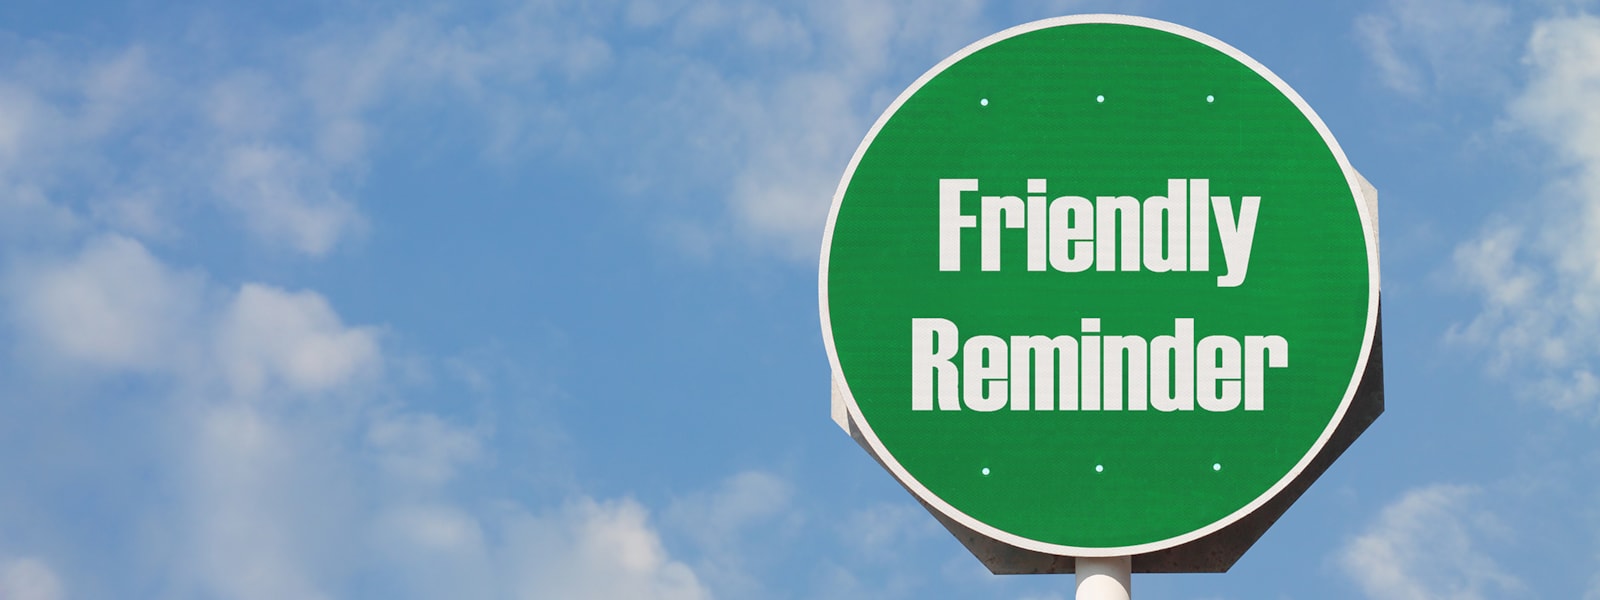 Blue skye background with green traffic sign that says Friendly reminder.  end  